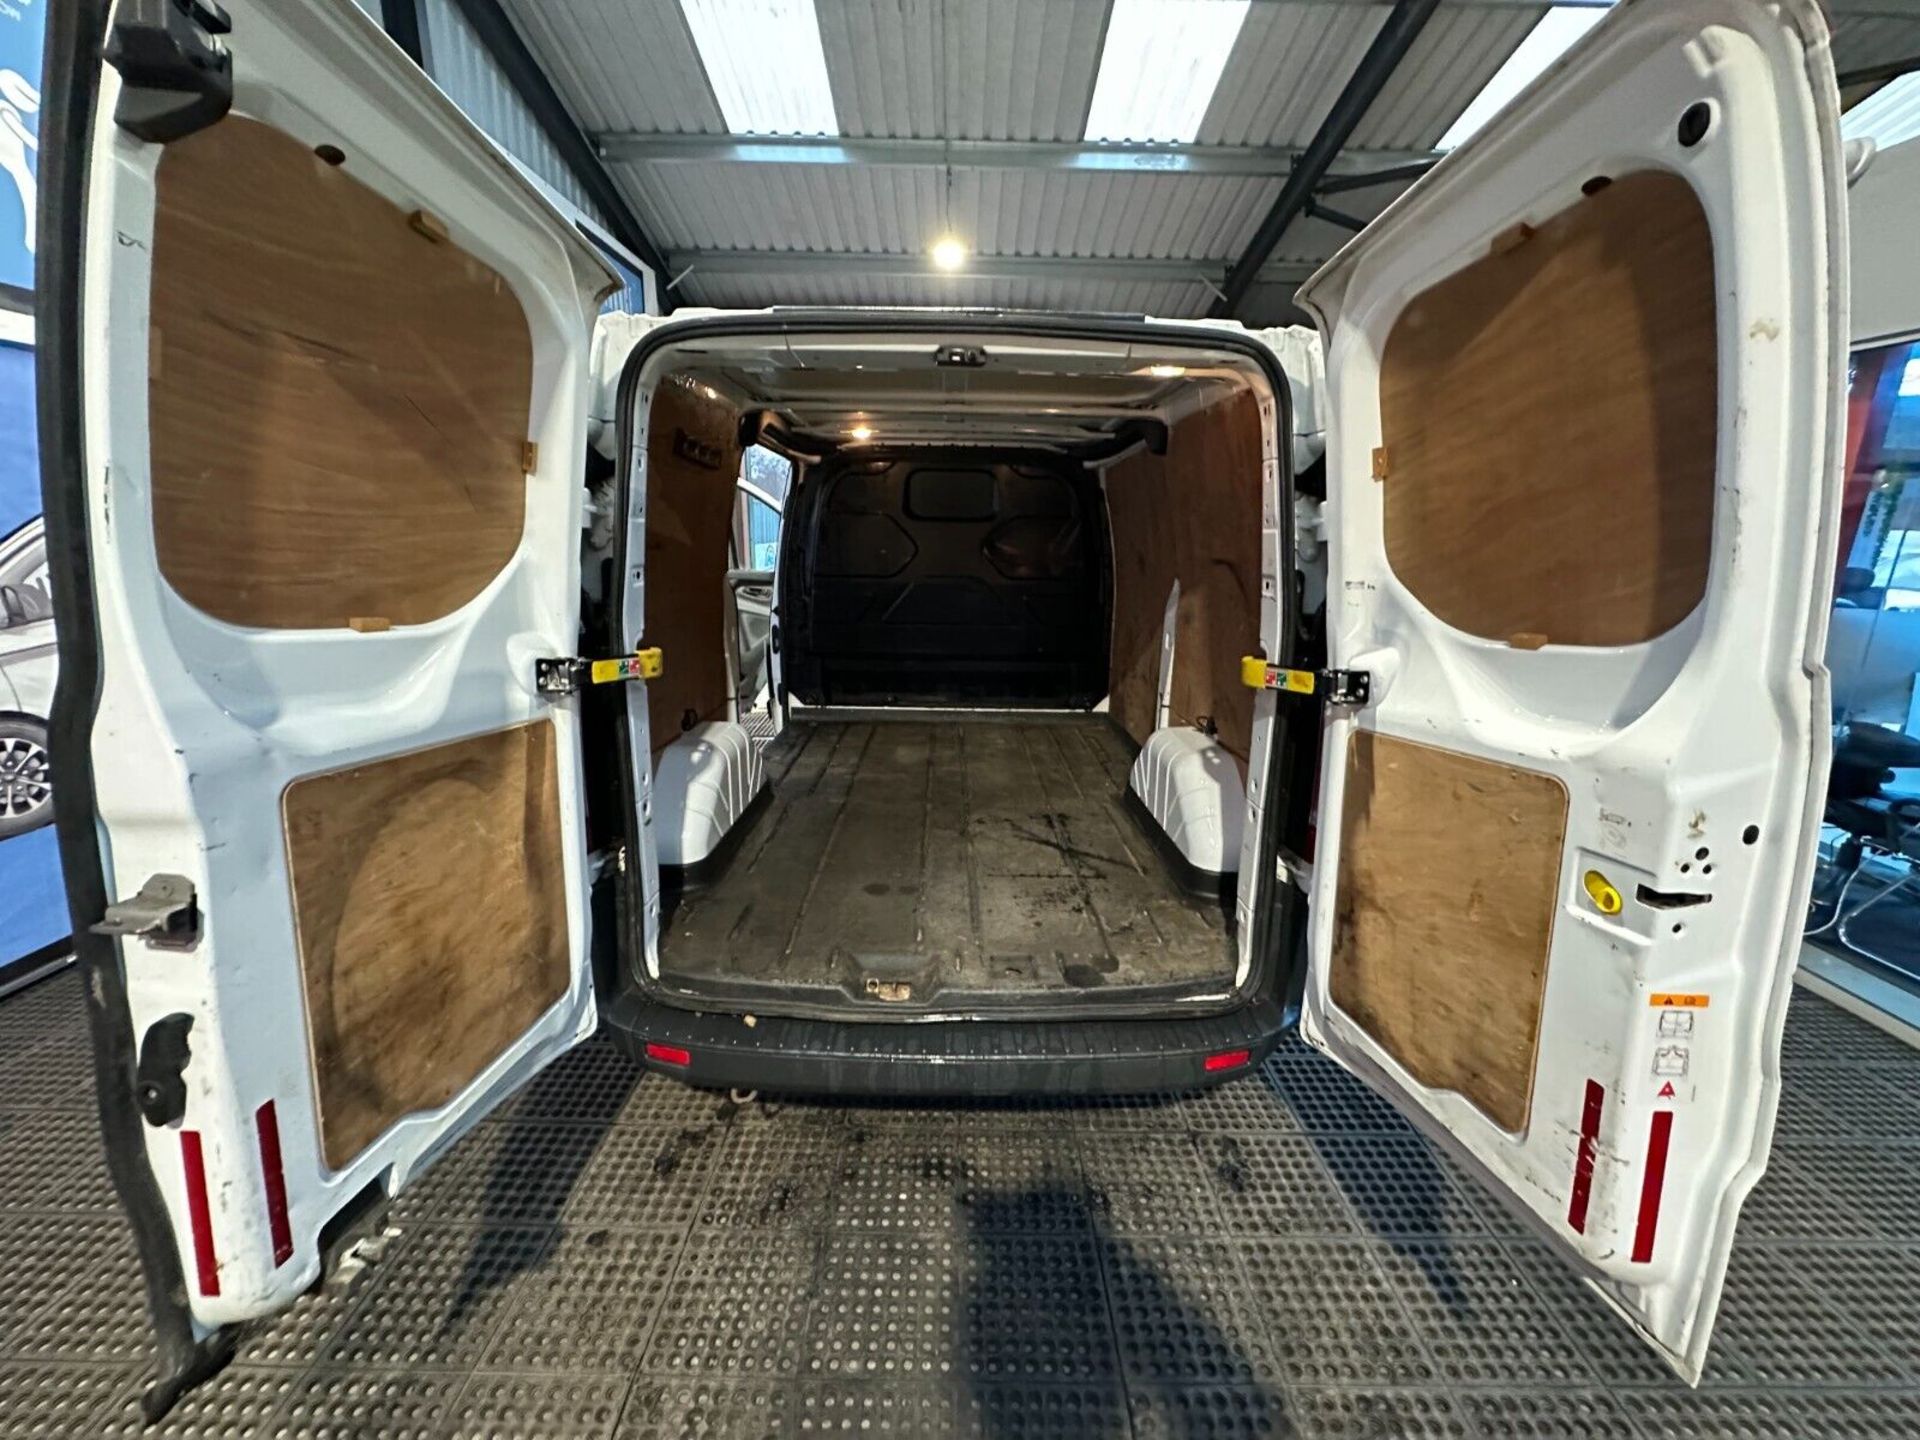 RELIABLE COMPANION: FORD TRANSIT CUSTOM 290, READY FOR DUTY - Image 5 of 14